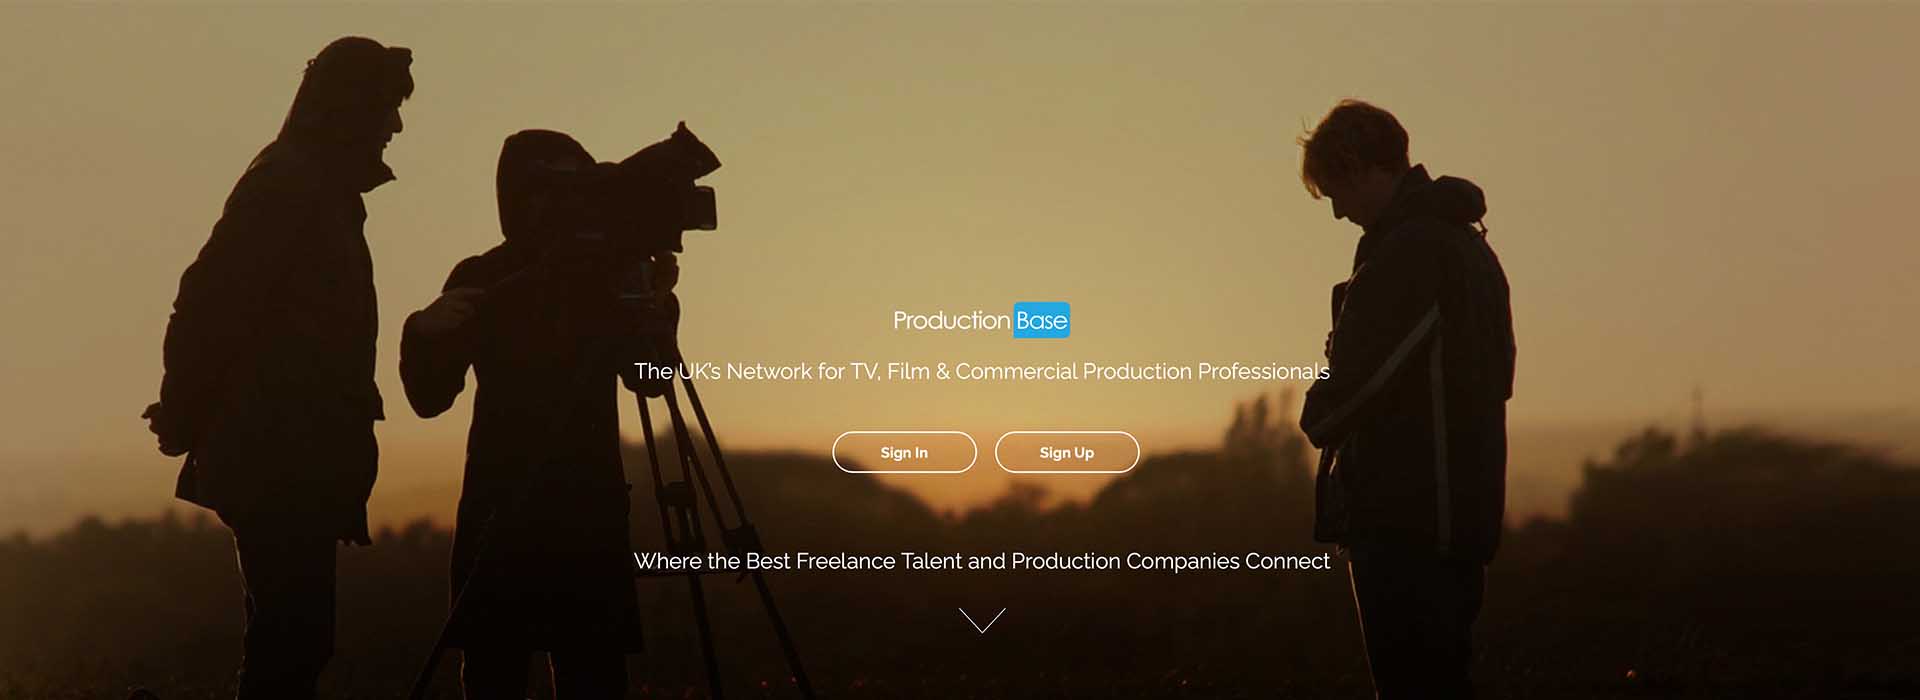 Image for ProductionBase, a film crew hire platform in London